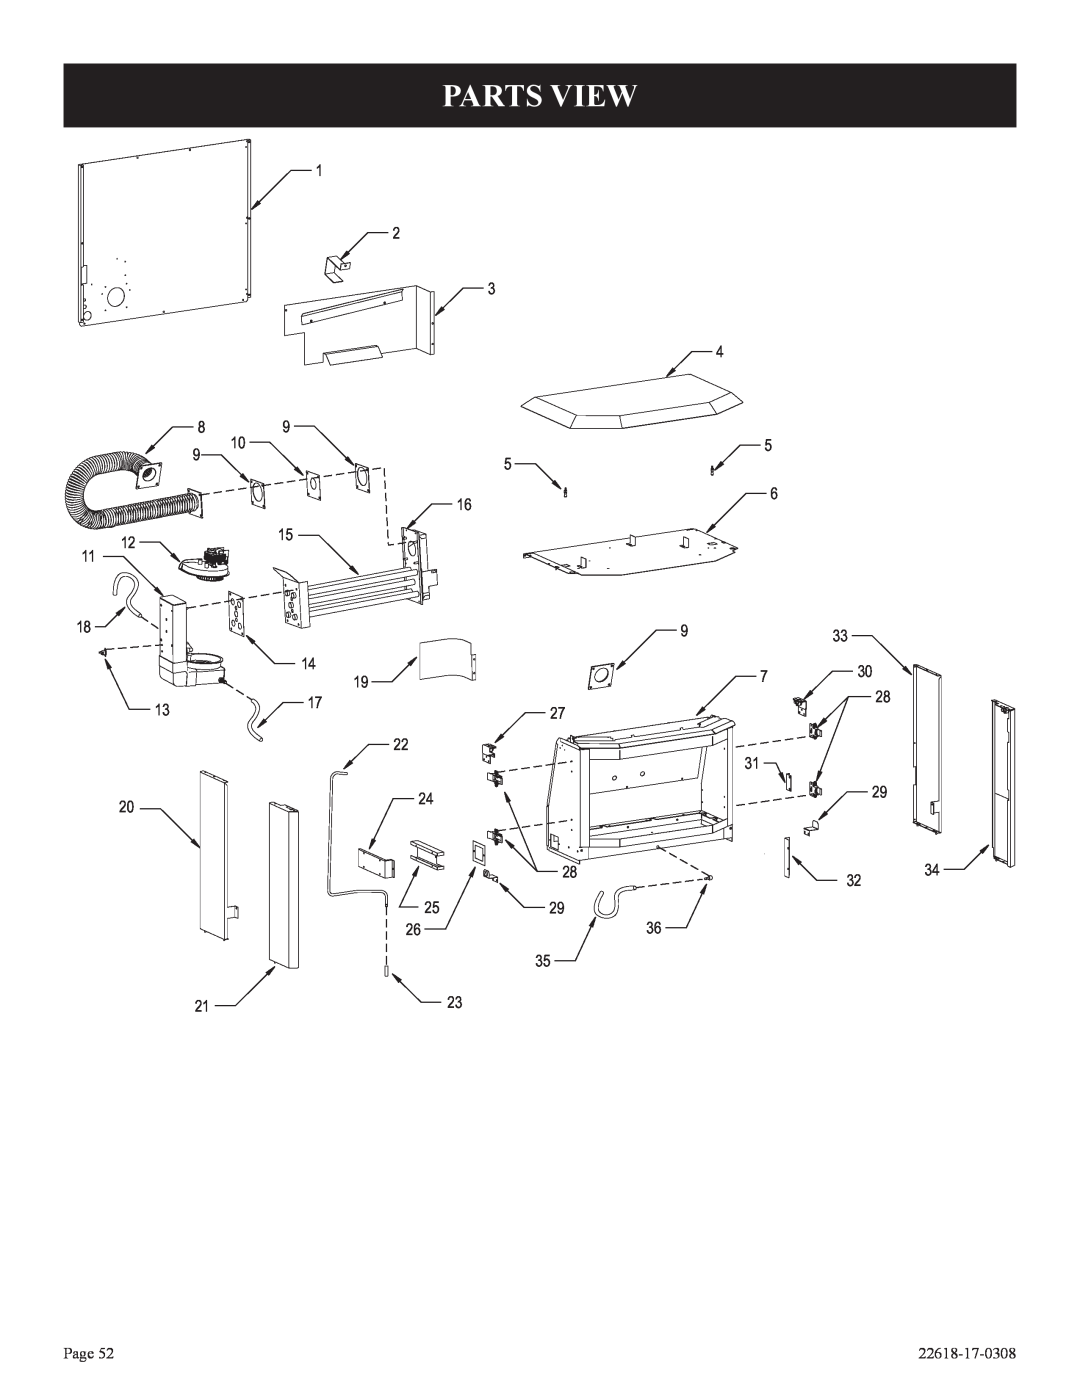 Empire Comfort Systems BP)-1, PV-28SV50-BN, PV-28SV55-CN, GN, GP)-1, CP Parts View, Page, 22618-17-0308 